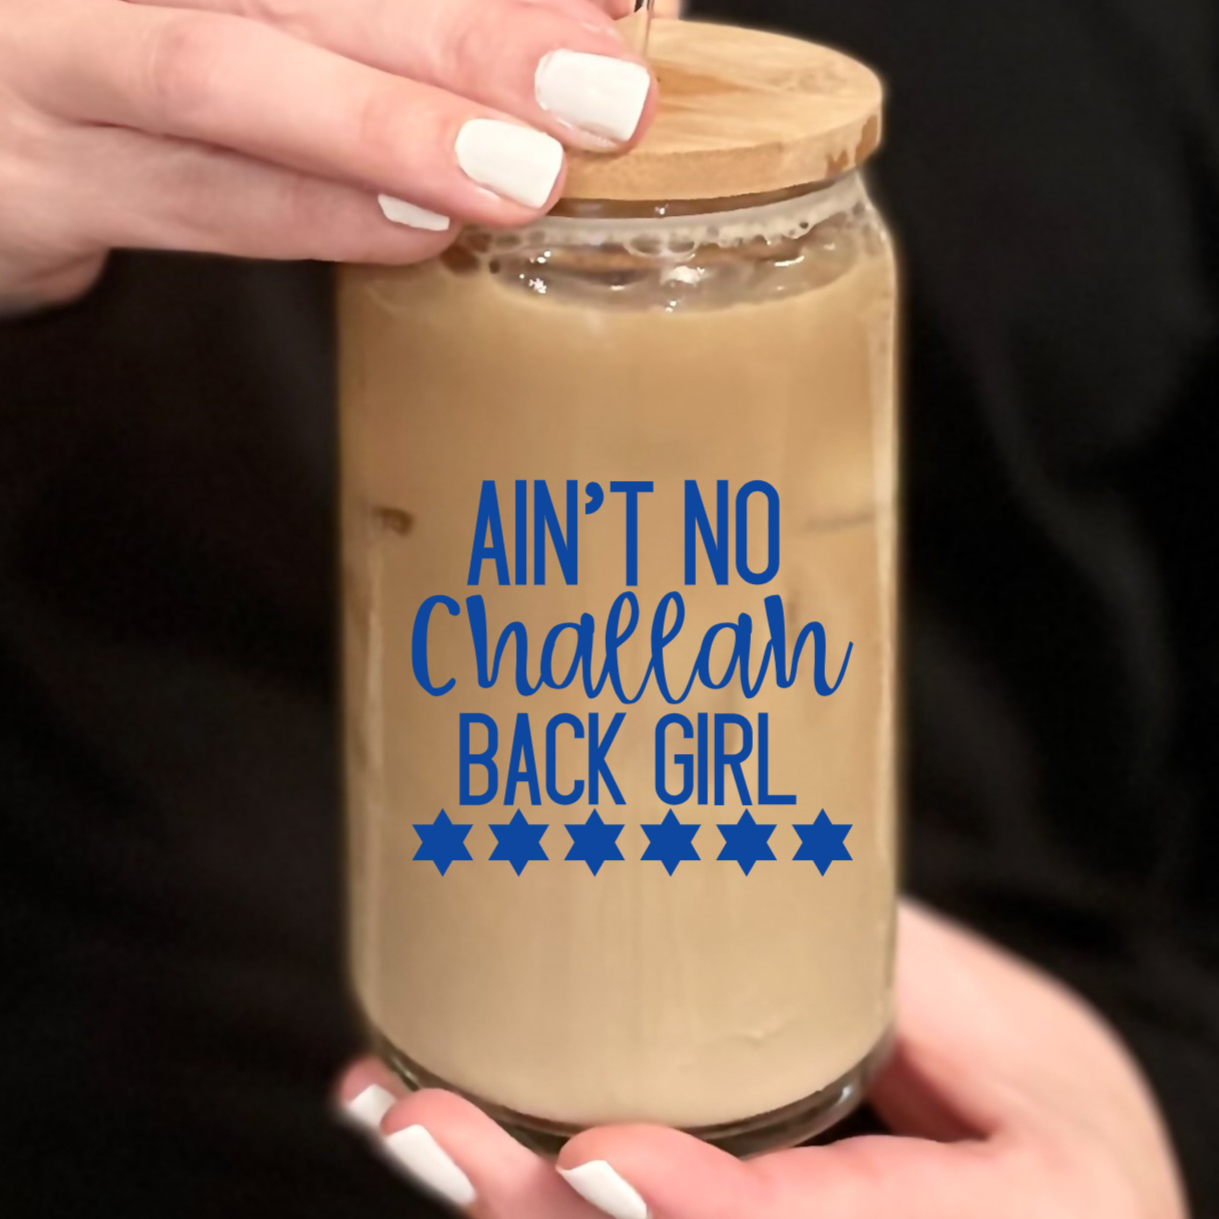 Ain't No Challah Back Girl Snowglobe Glass Can Cup Salt and Sparkle